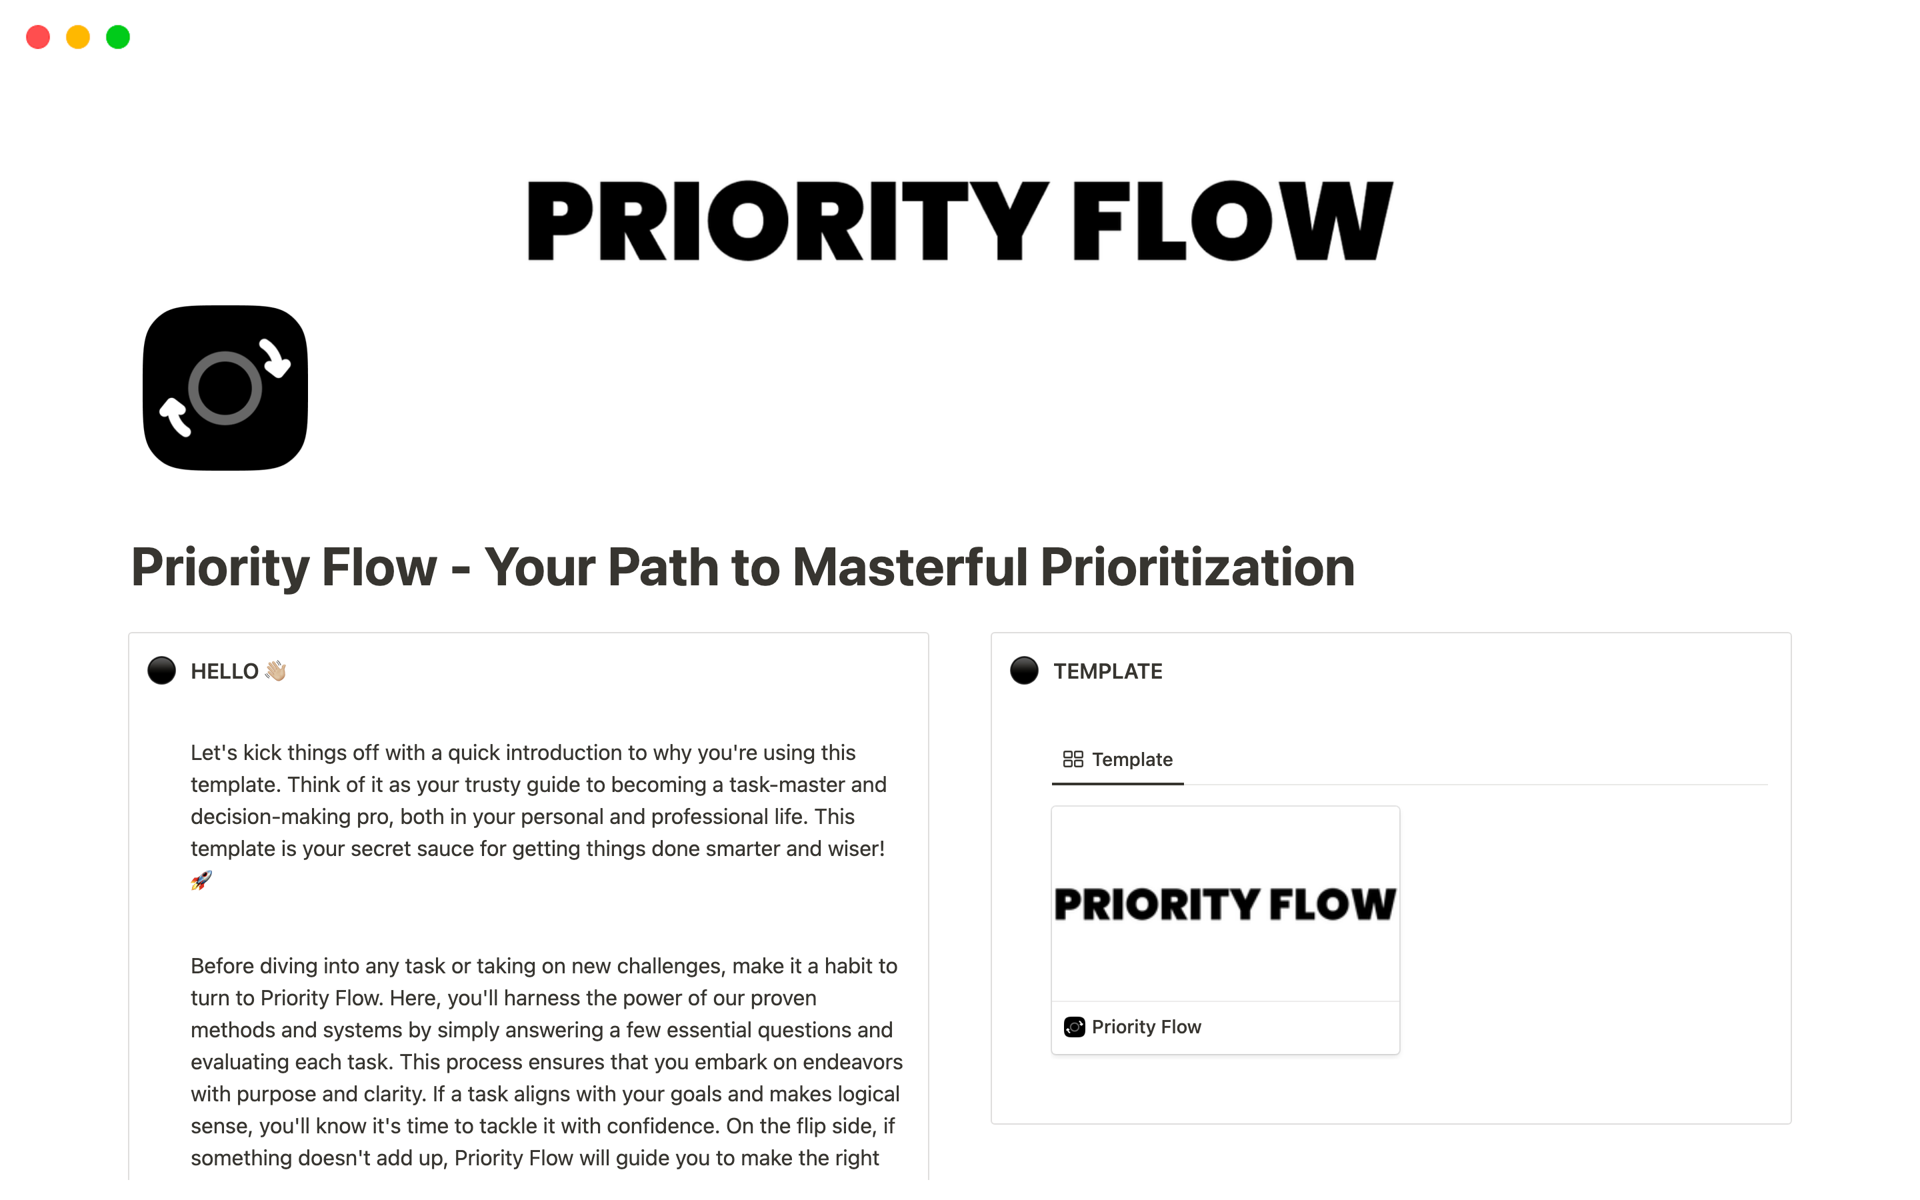 Tired of feeling overwhelmed by endless to-do lists and decisions? Say hello to "Priority Flow" – your personal productivity powerhouse!